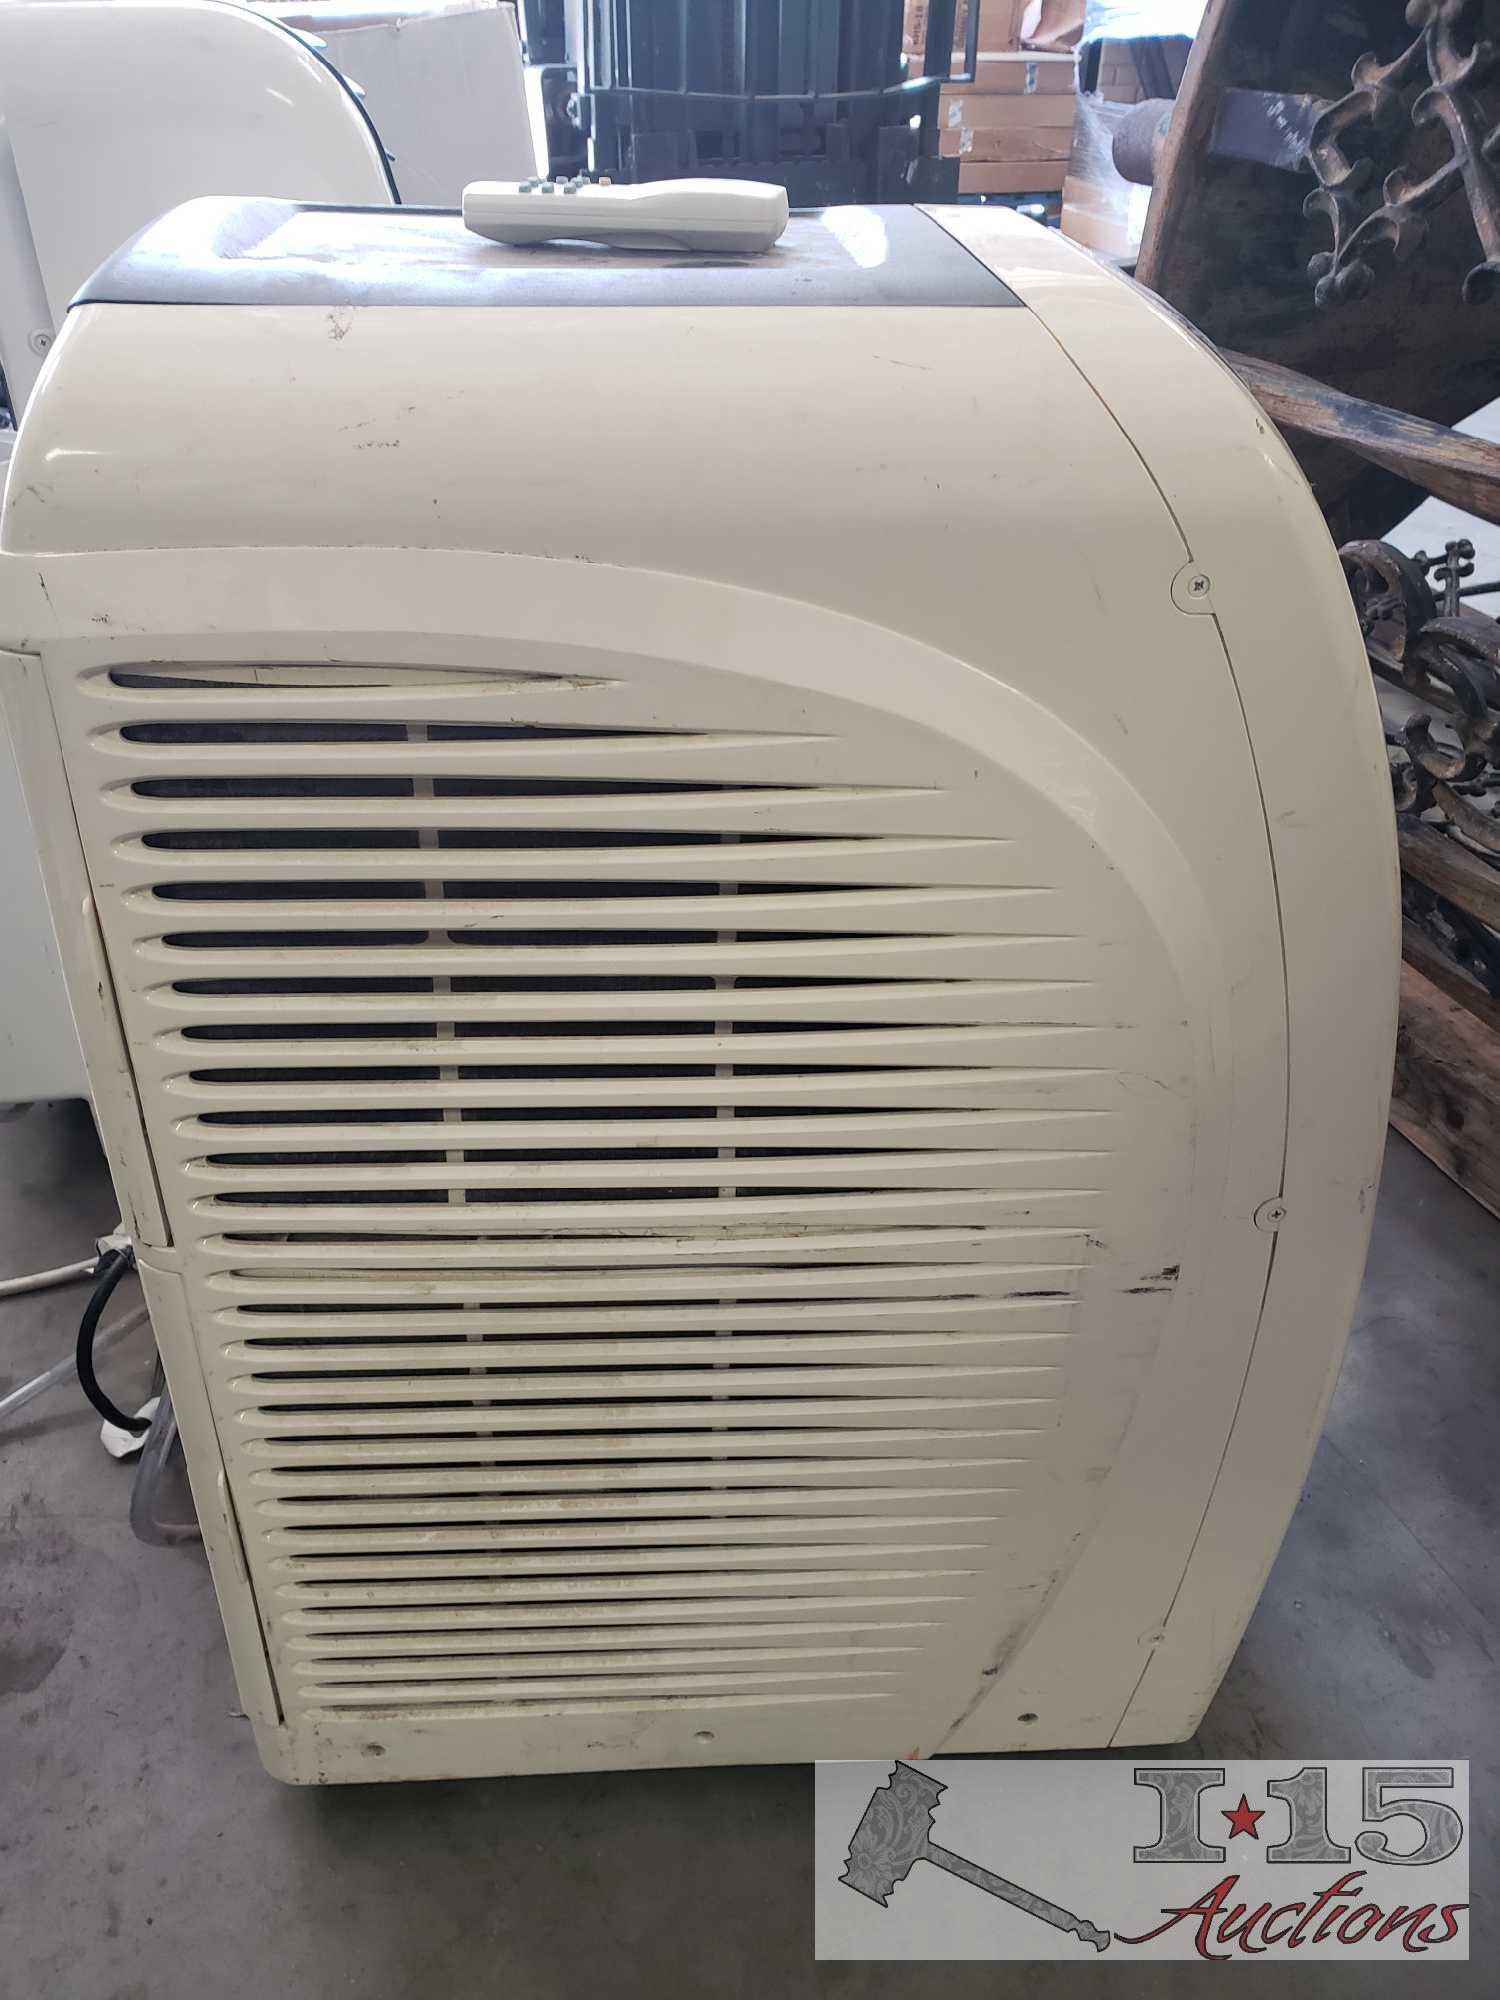 2 portable air conditioner's and a heater